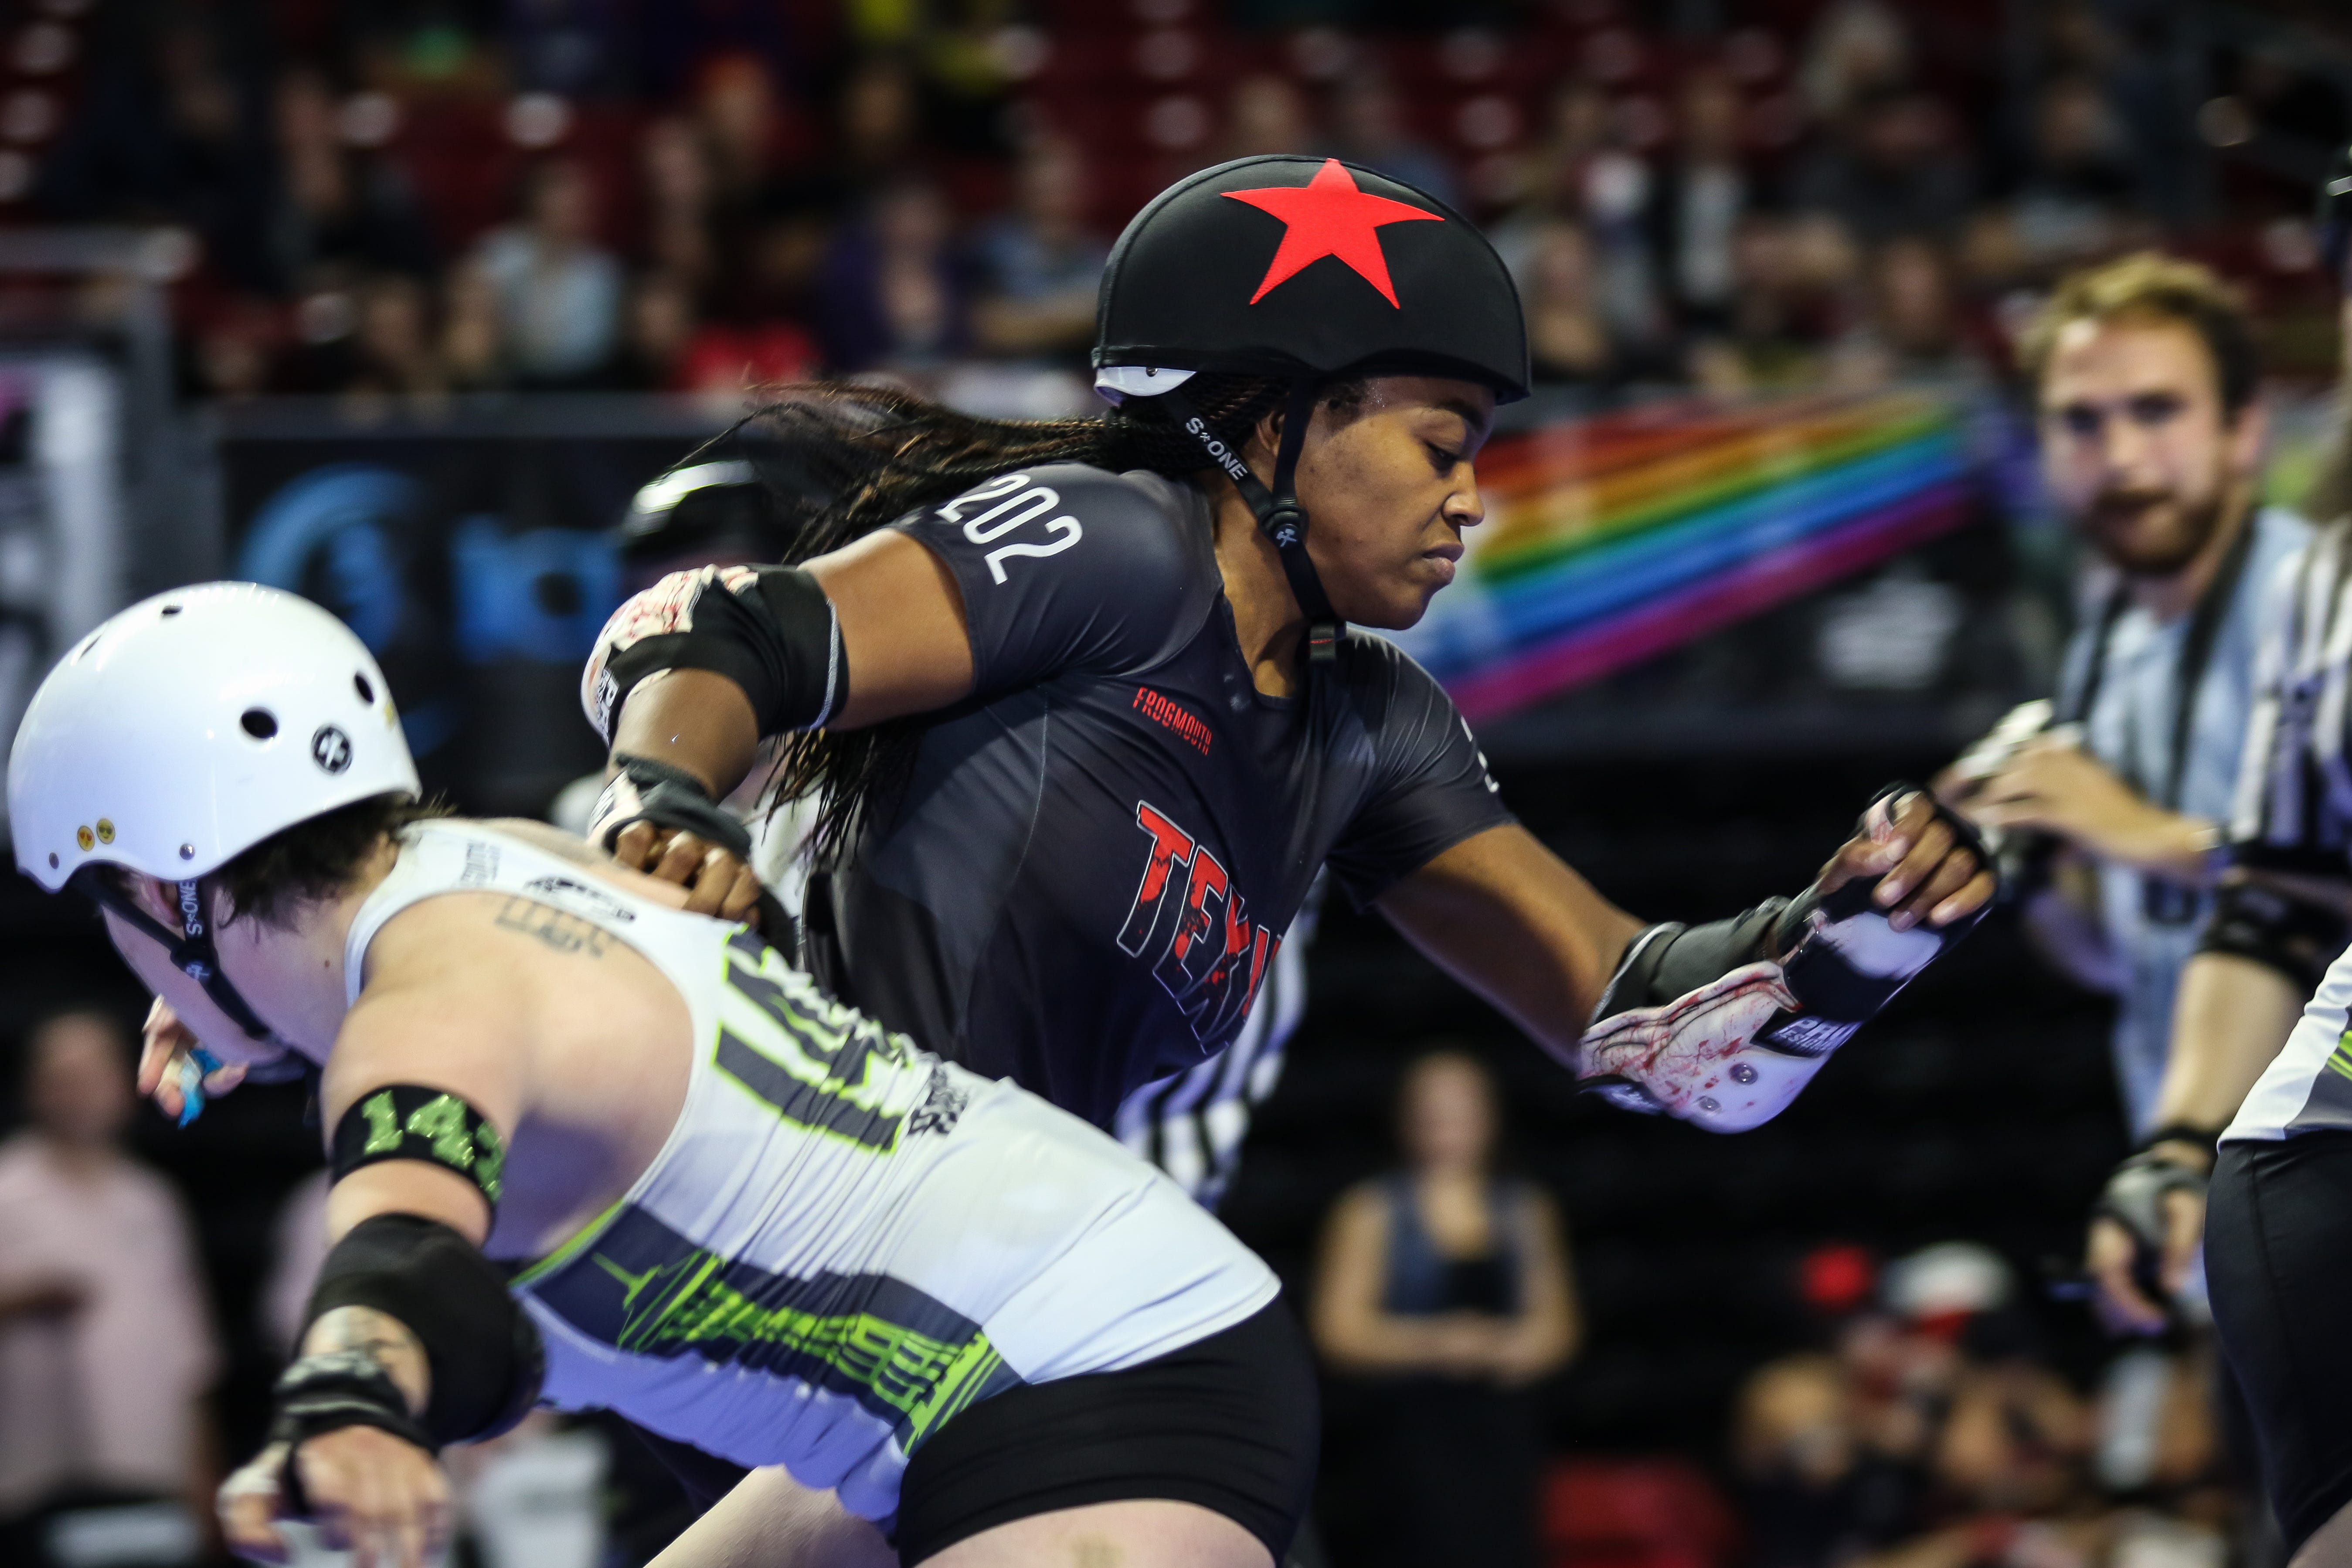 Why the Whole World Plays Roller Derby, by Frogmouth